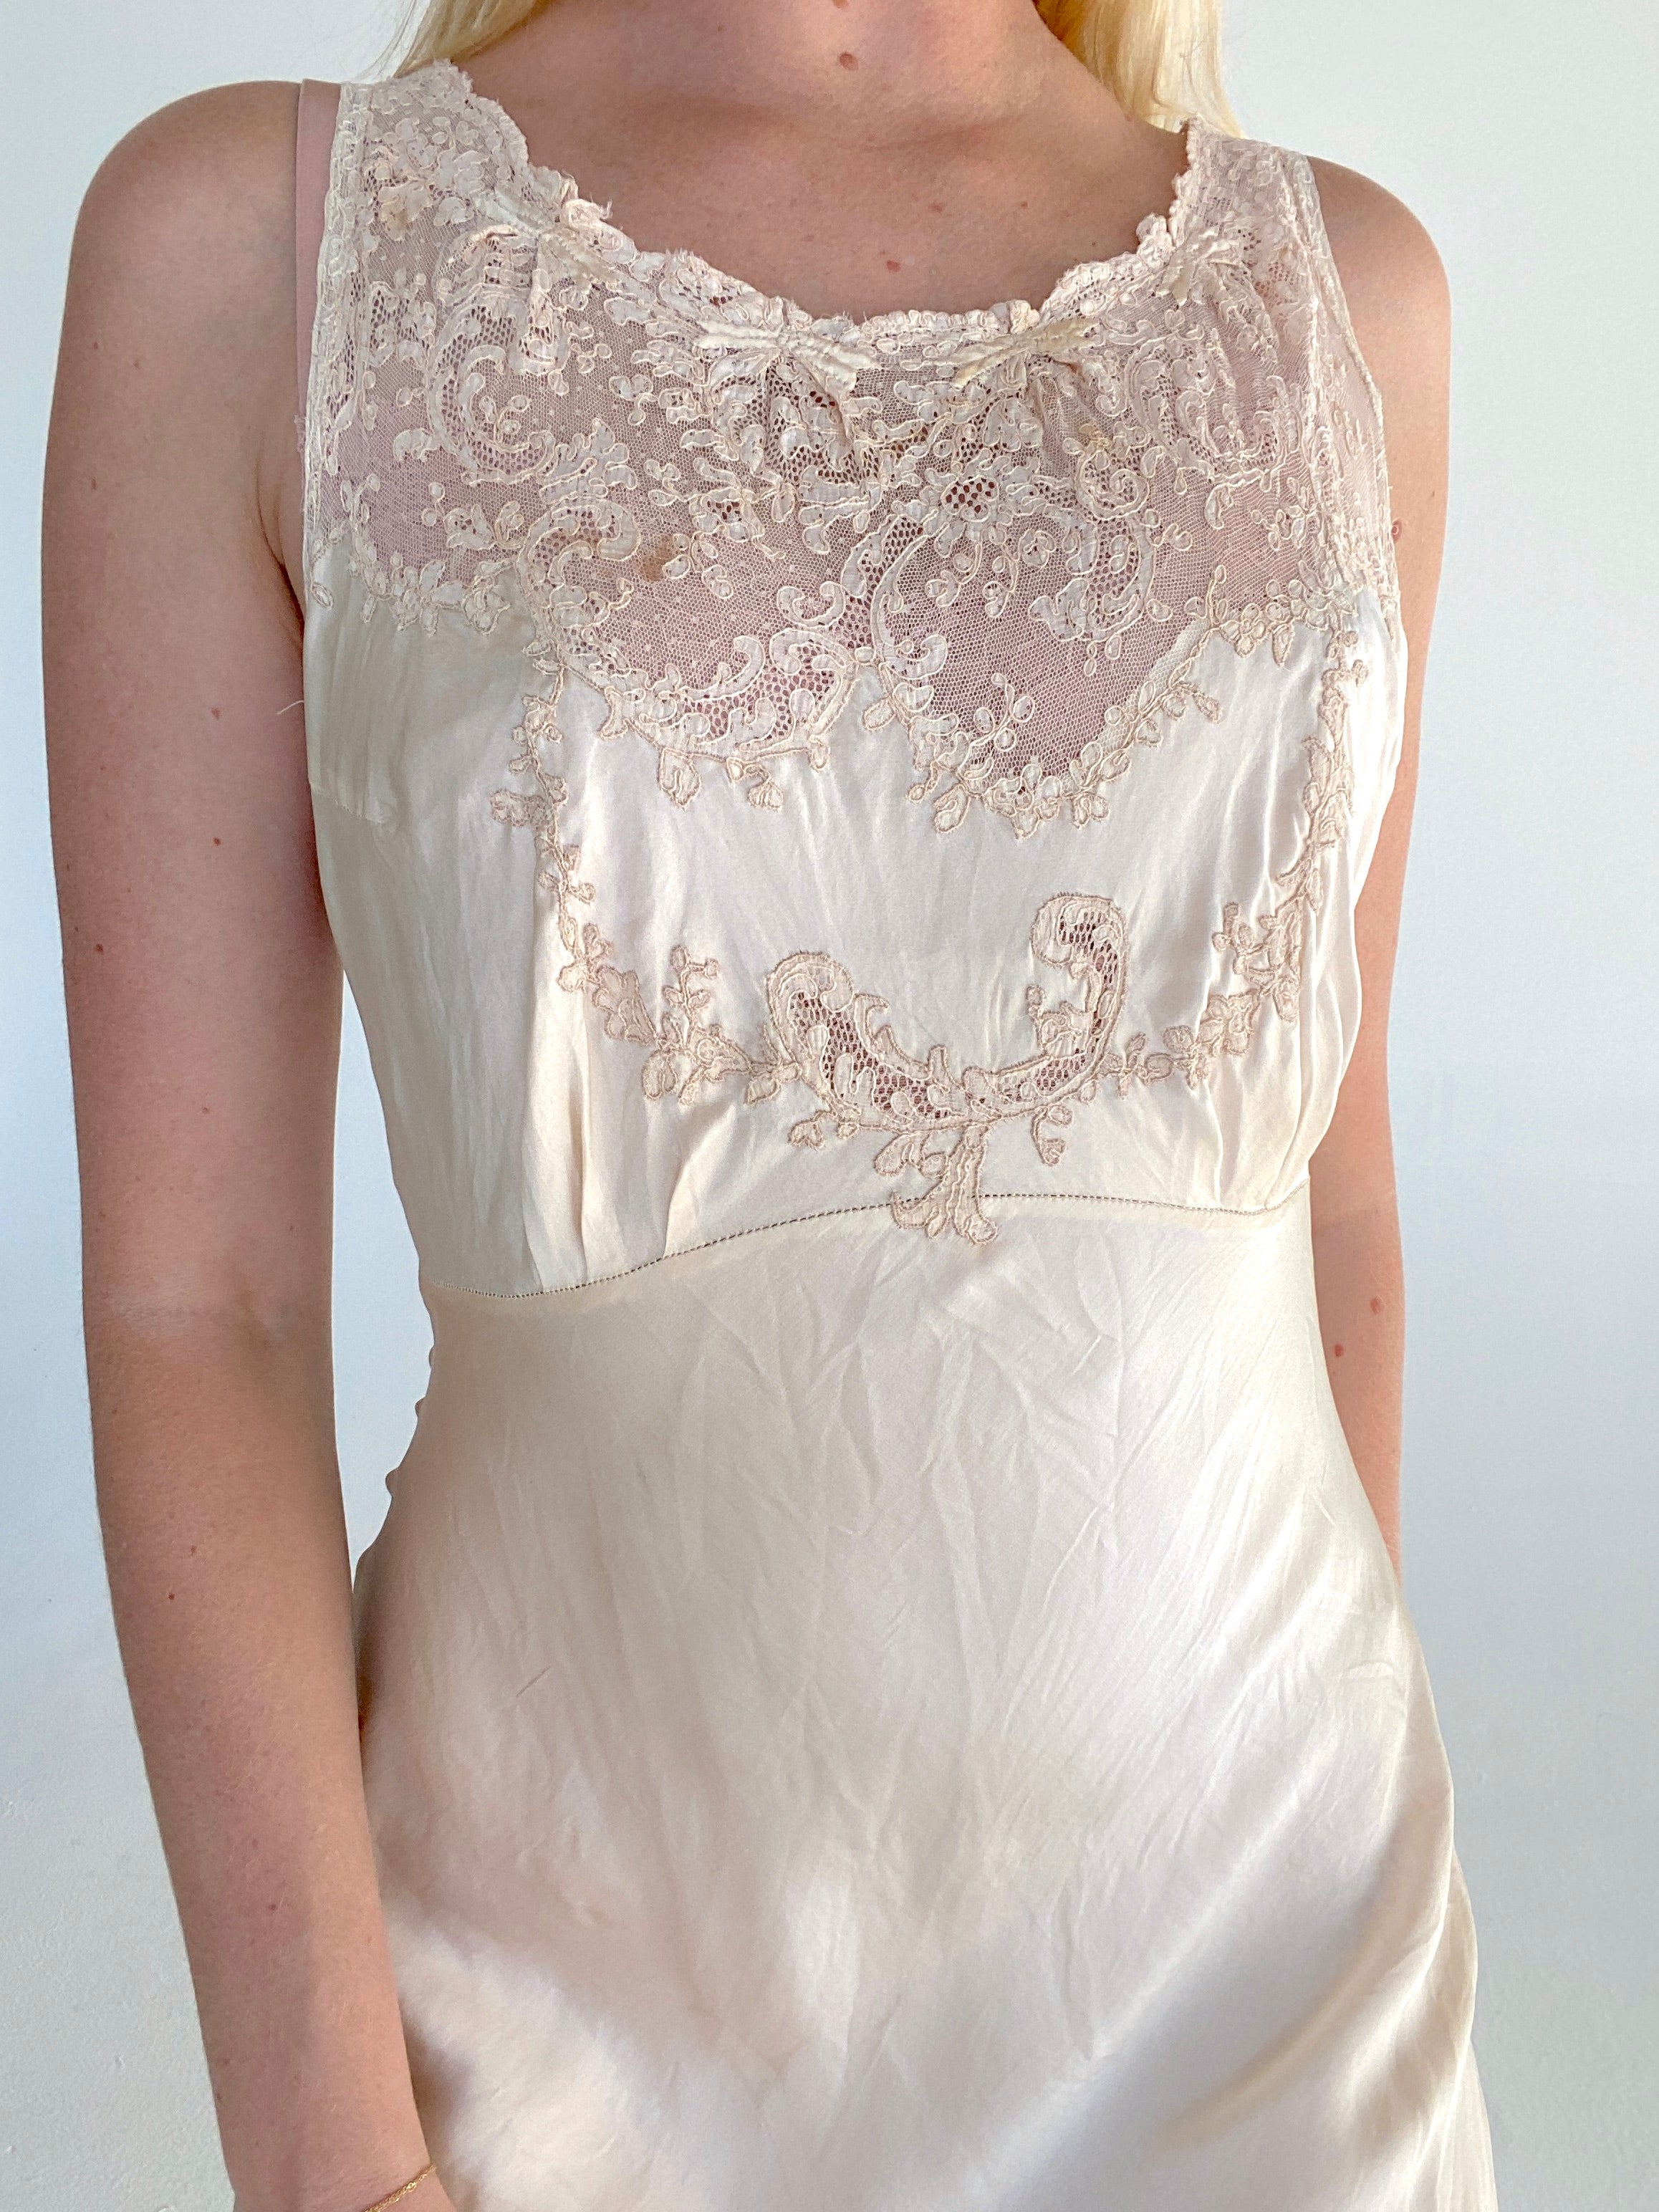 1930's White Silk Slip with Bow Embroidery and Lace Inserts